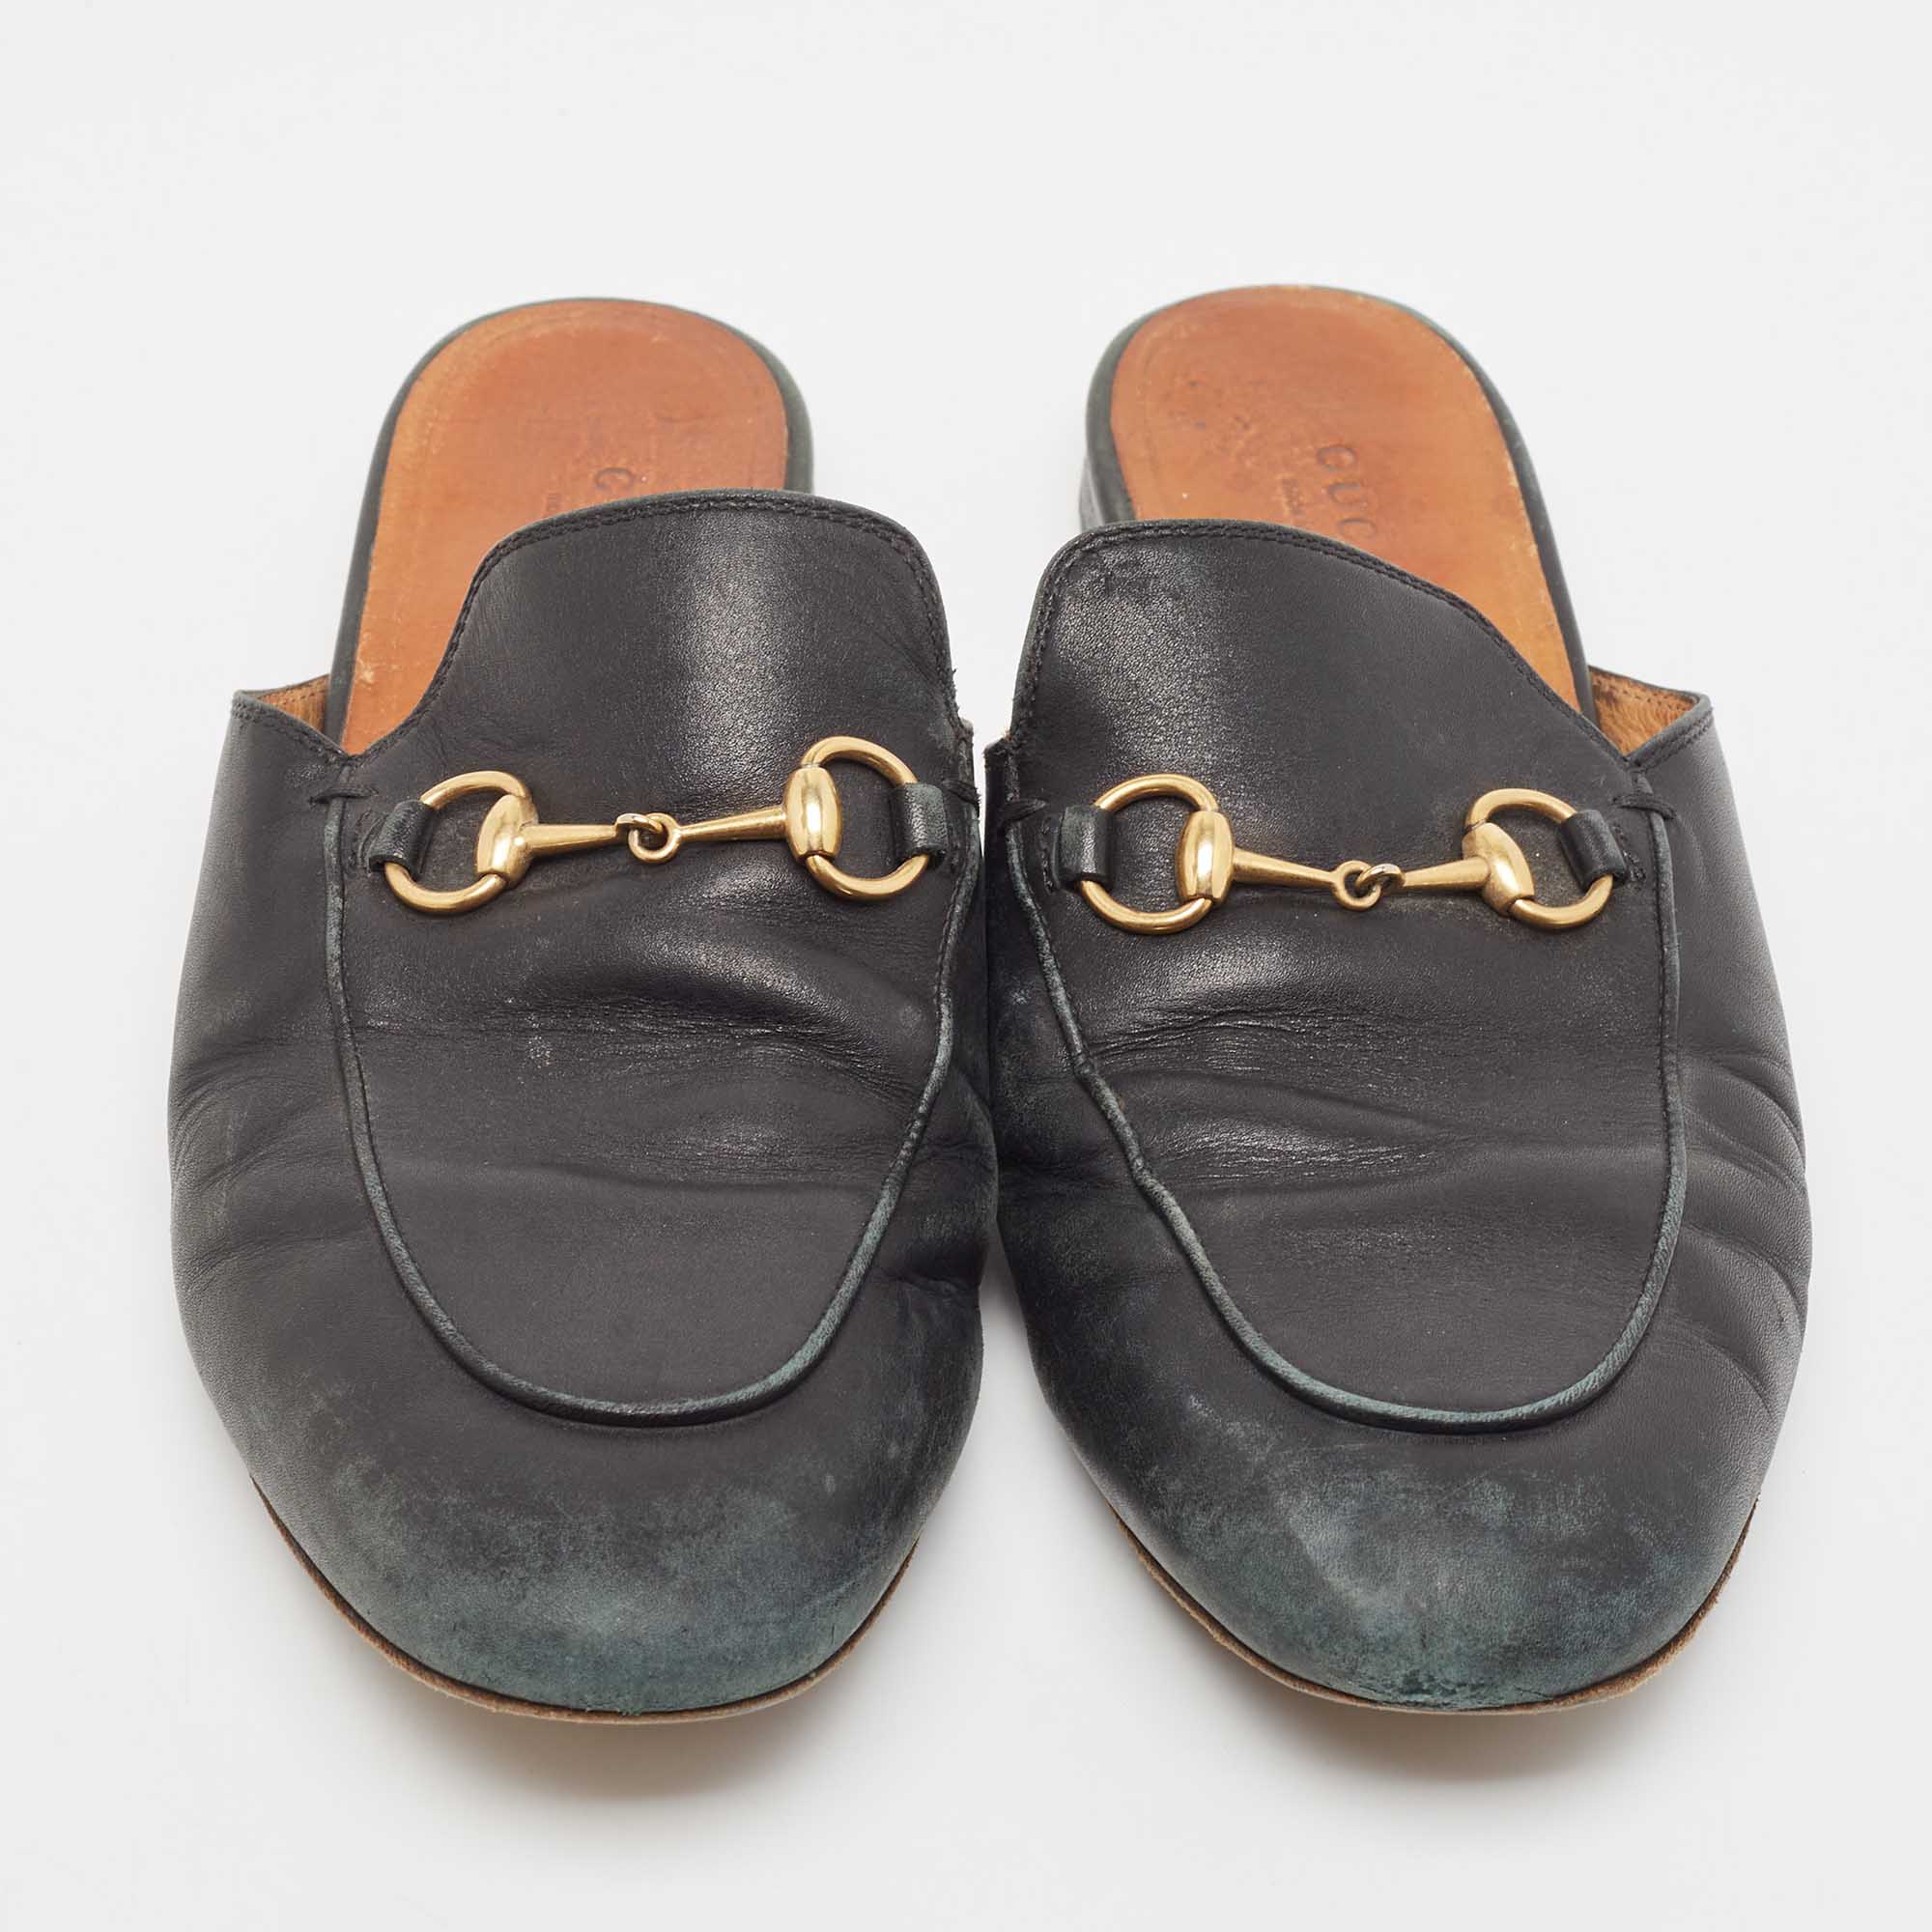 Gucci Black Leather Princetown Mules Size 38.5 A